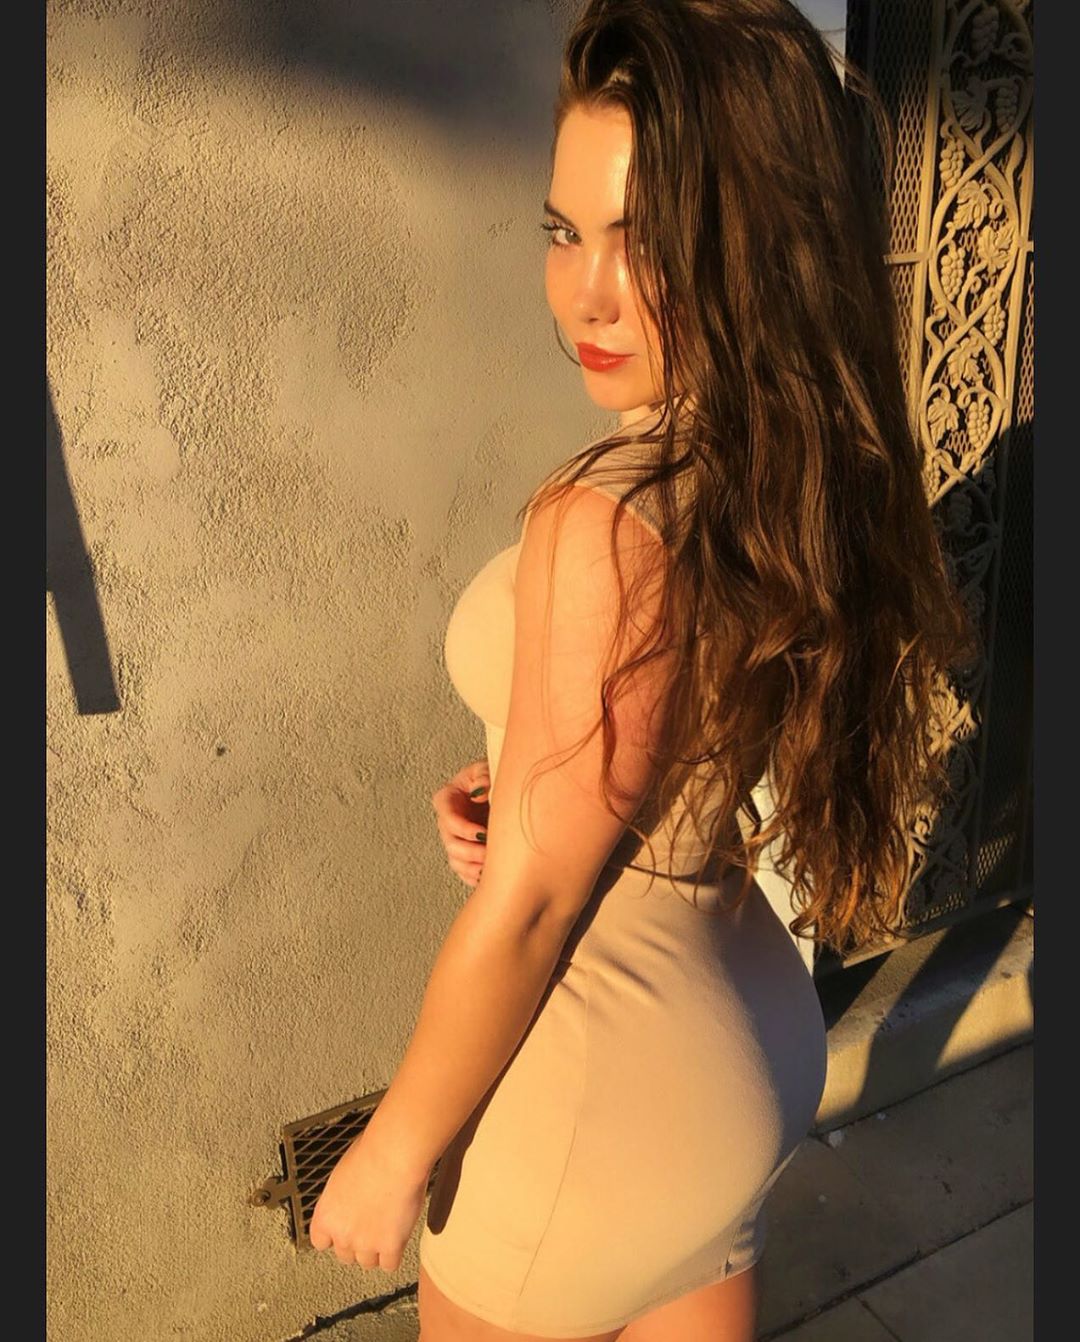 Photos n°1 : McKayla Maroney is Glowing for Her Workout!